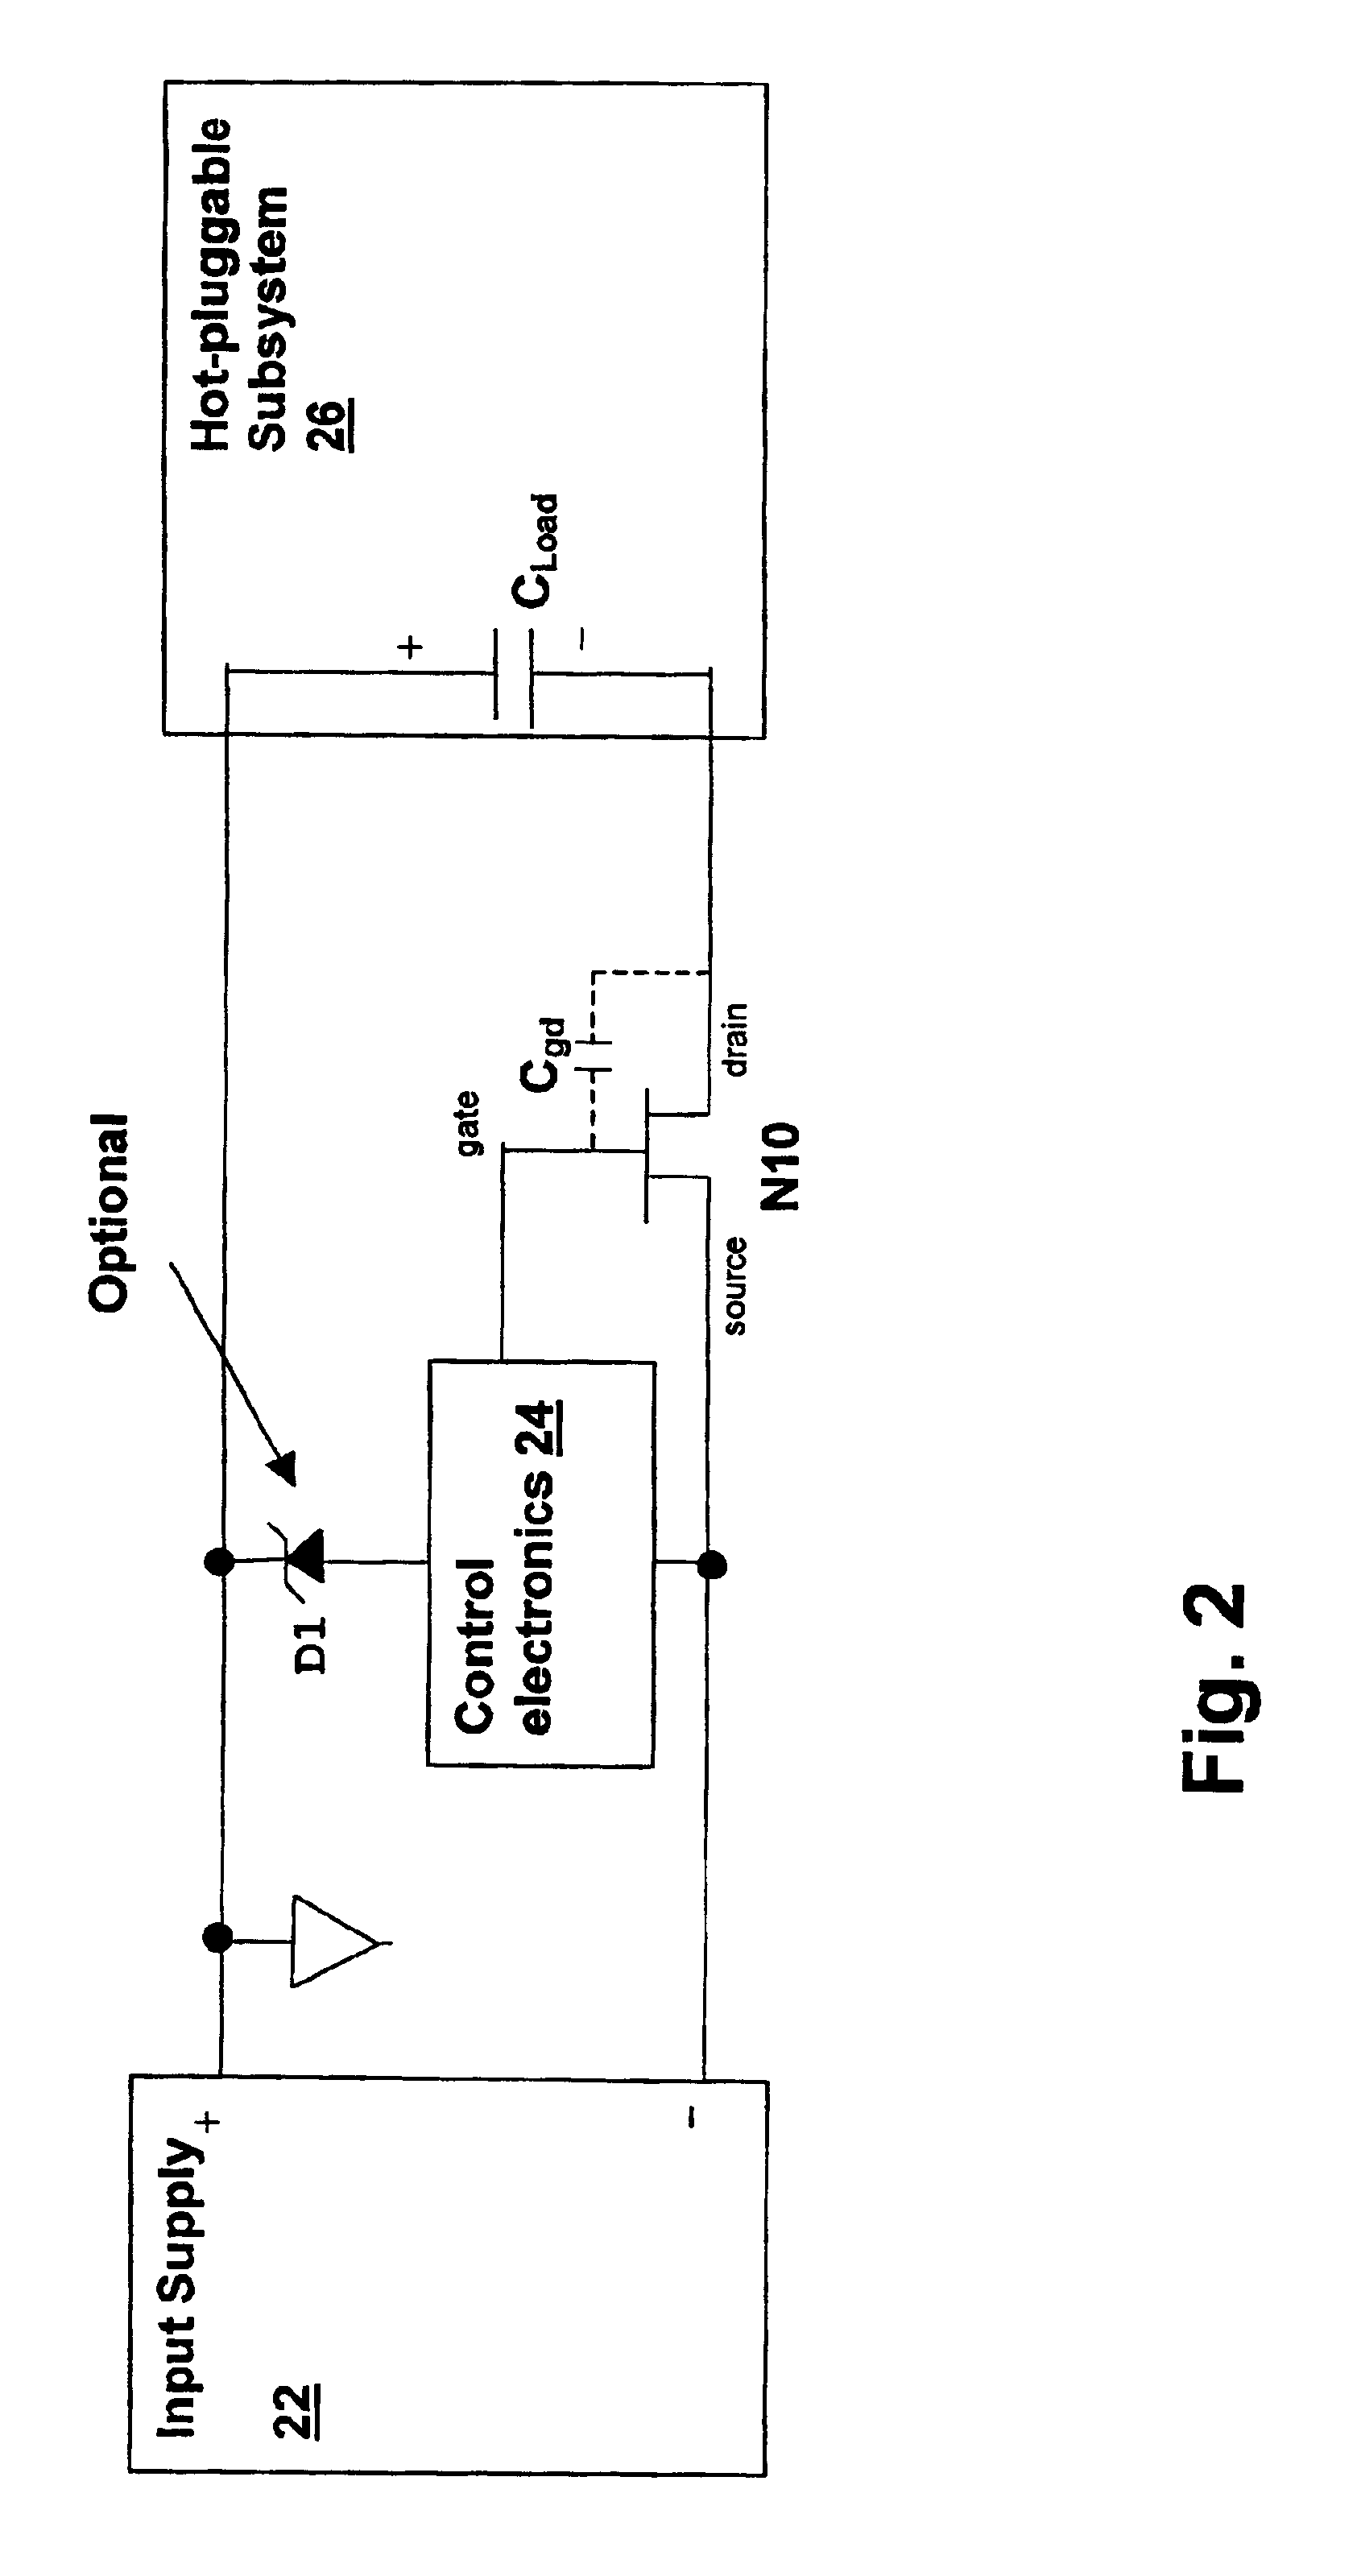 Apparatus and method for adaptively controlling power supplied to a hot-pluggable subsystem